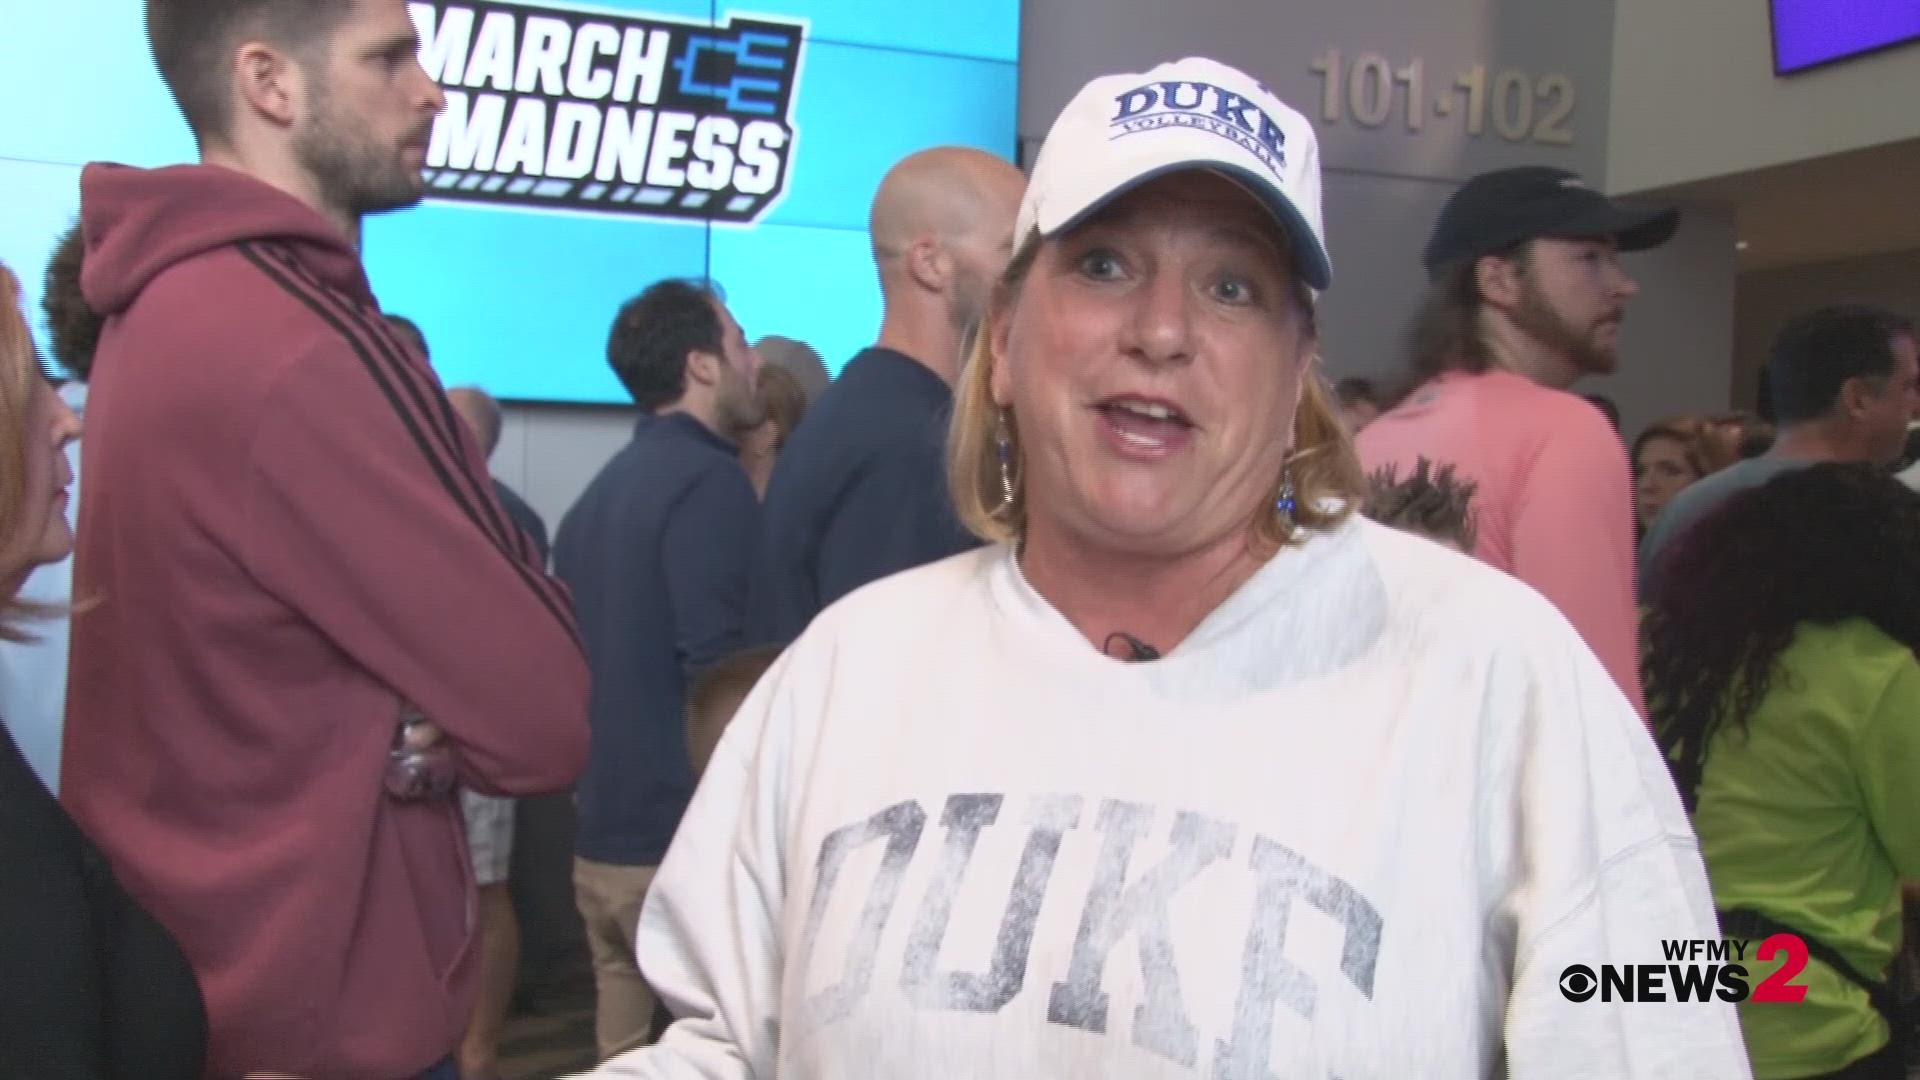 Fans make the trip to Greenville, South Carolina to see Coach K and Duke in the NCAA Tournament.